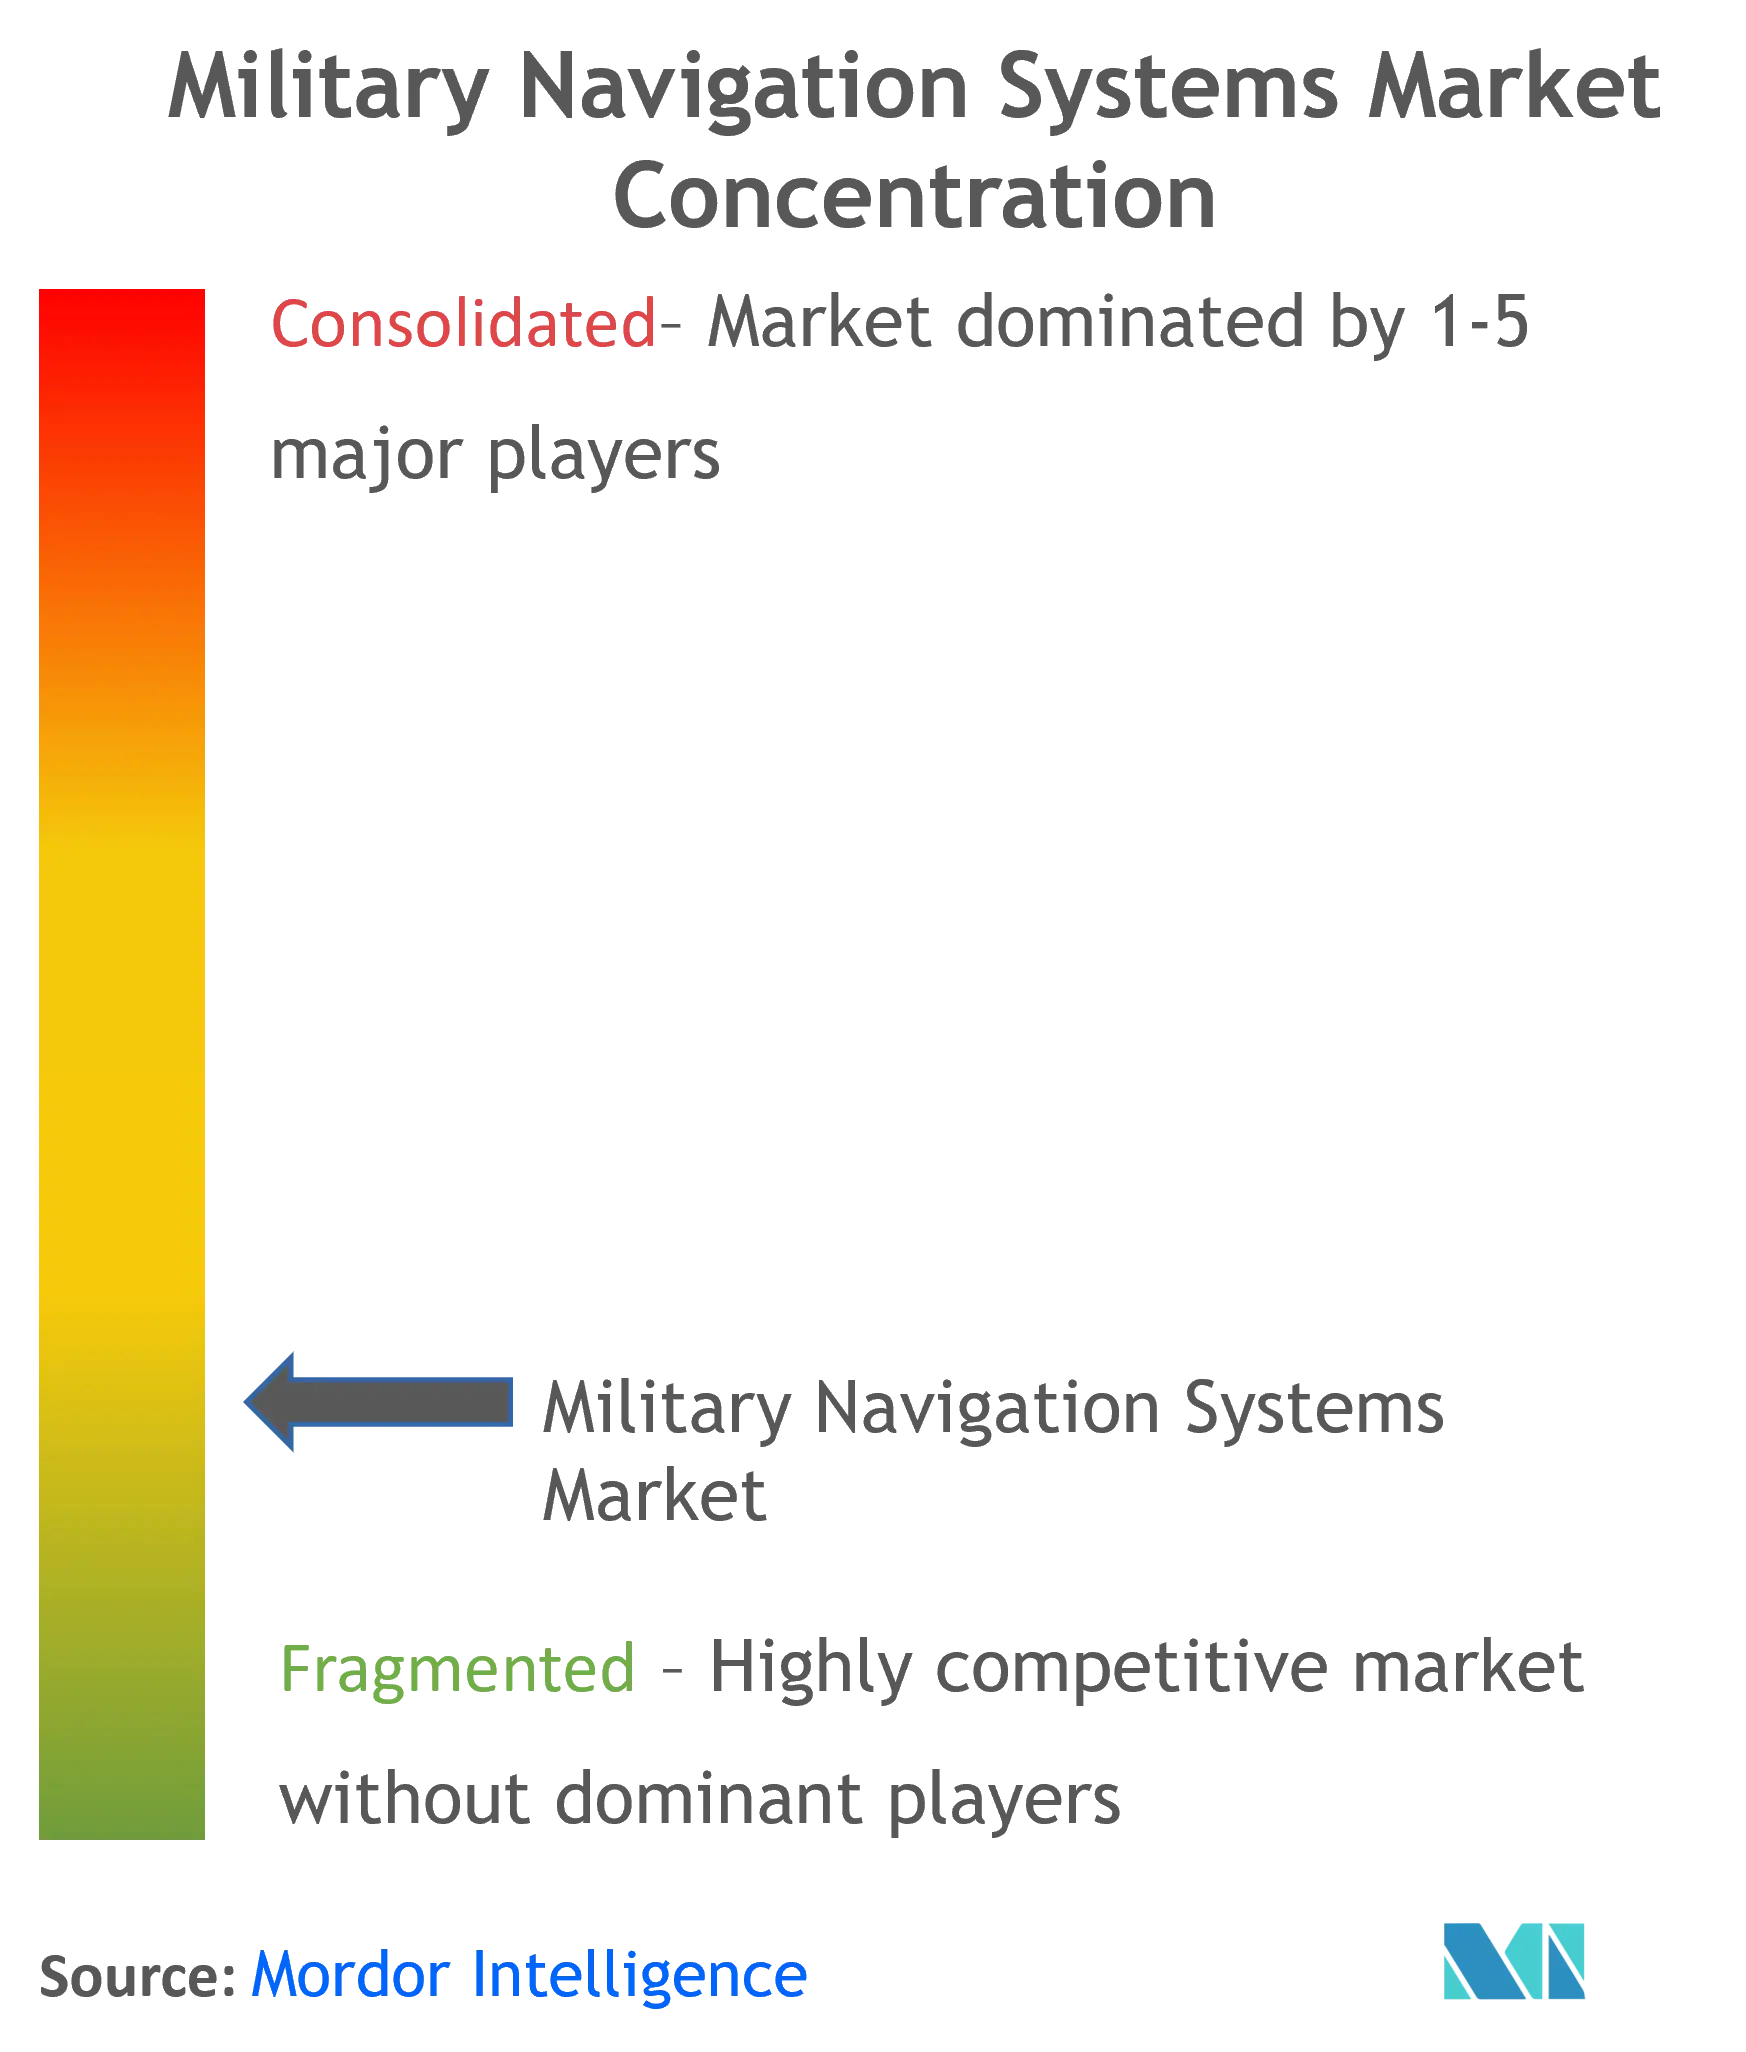 Military Navigation Systems Market Concentration